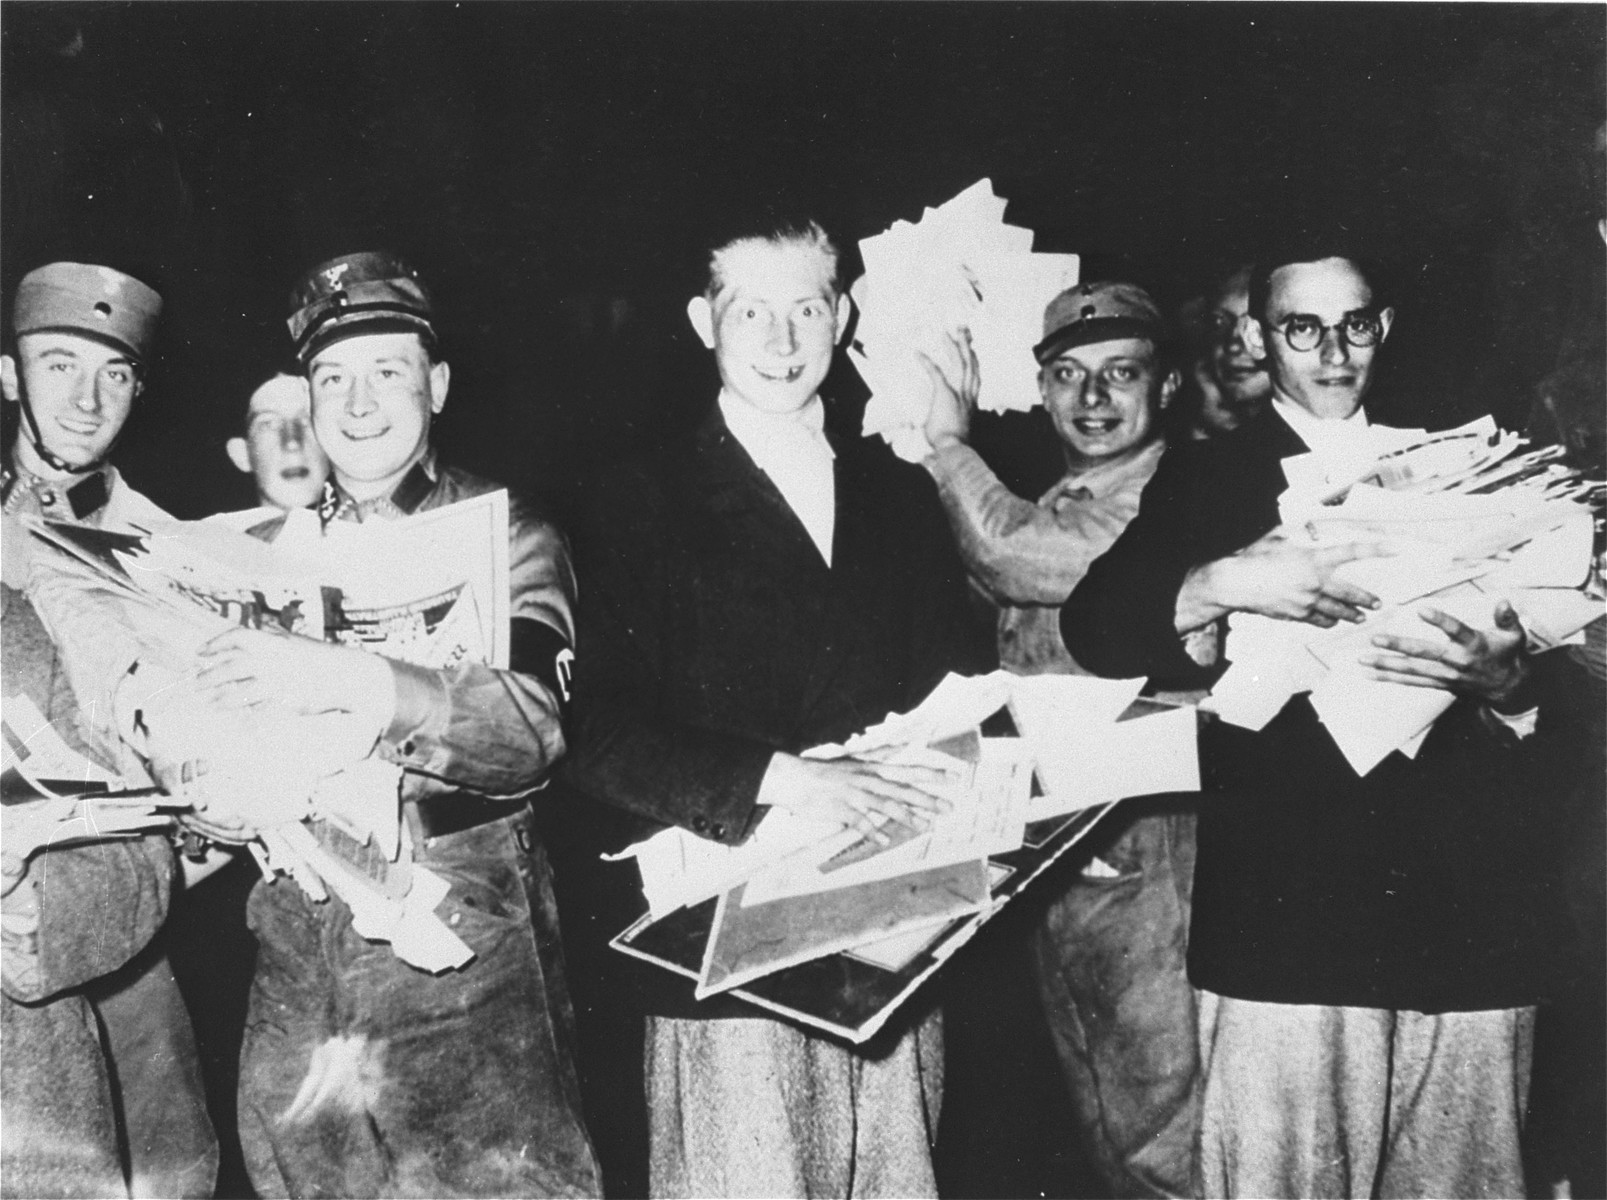 Students and SA members carry piles of "un-German" literature to throw into the bonfire on the Berlin Opernplatz.